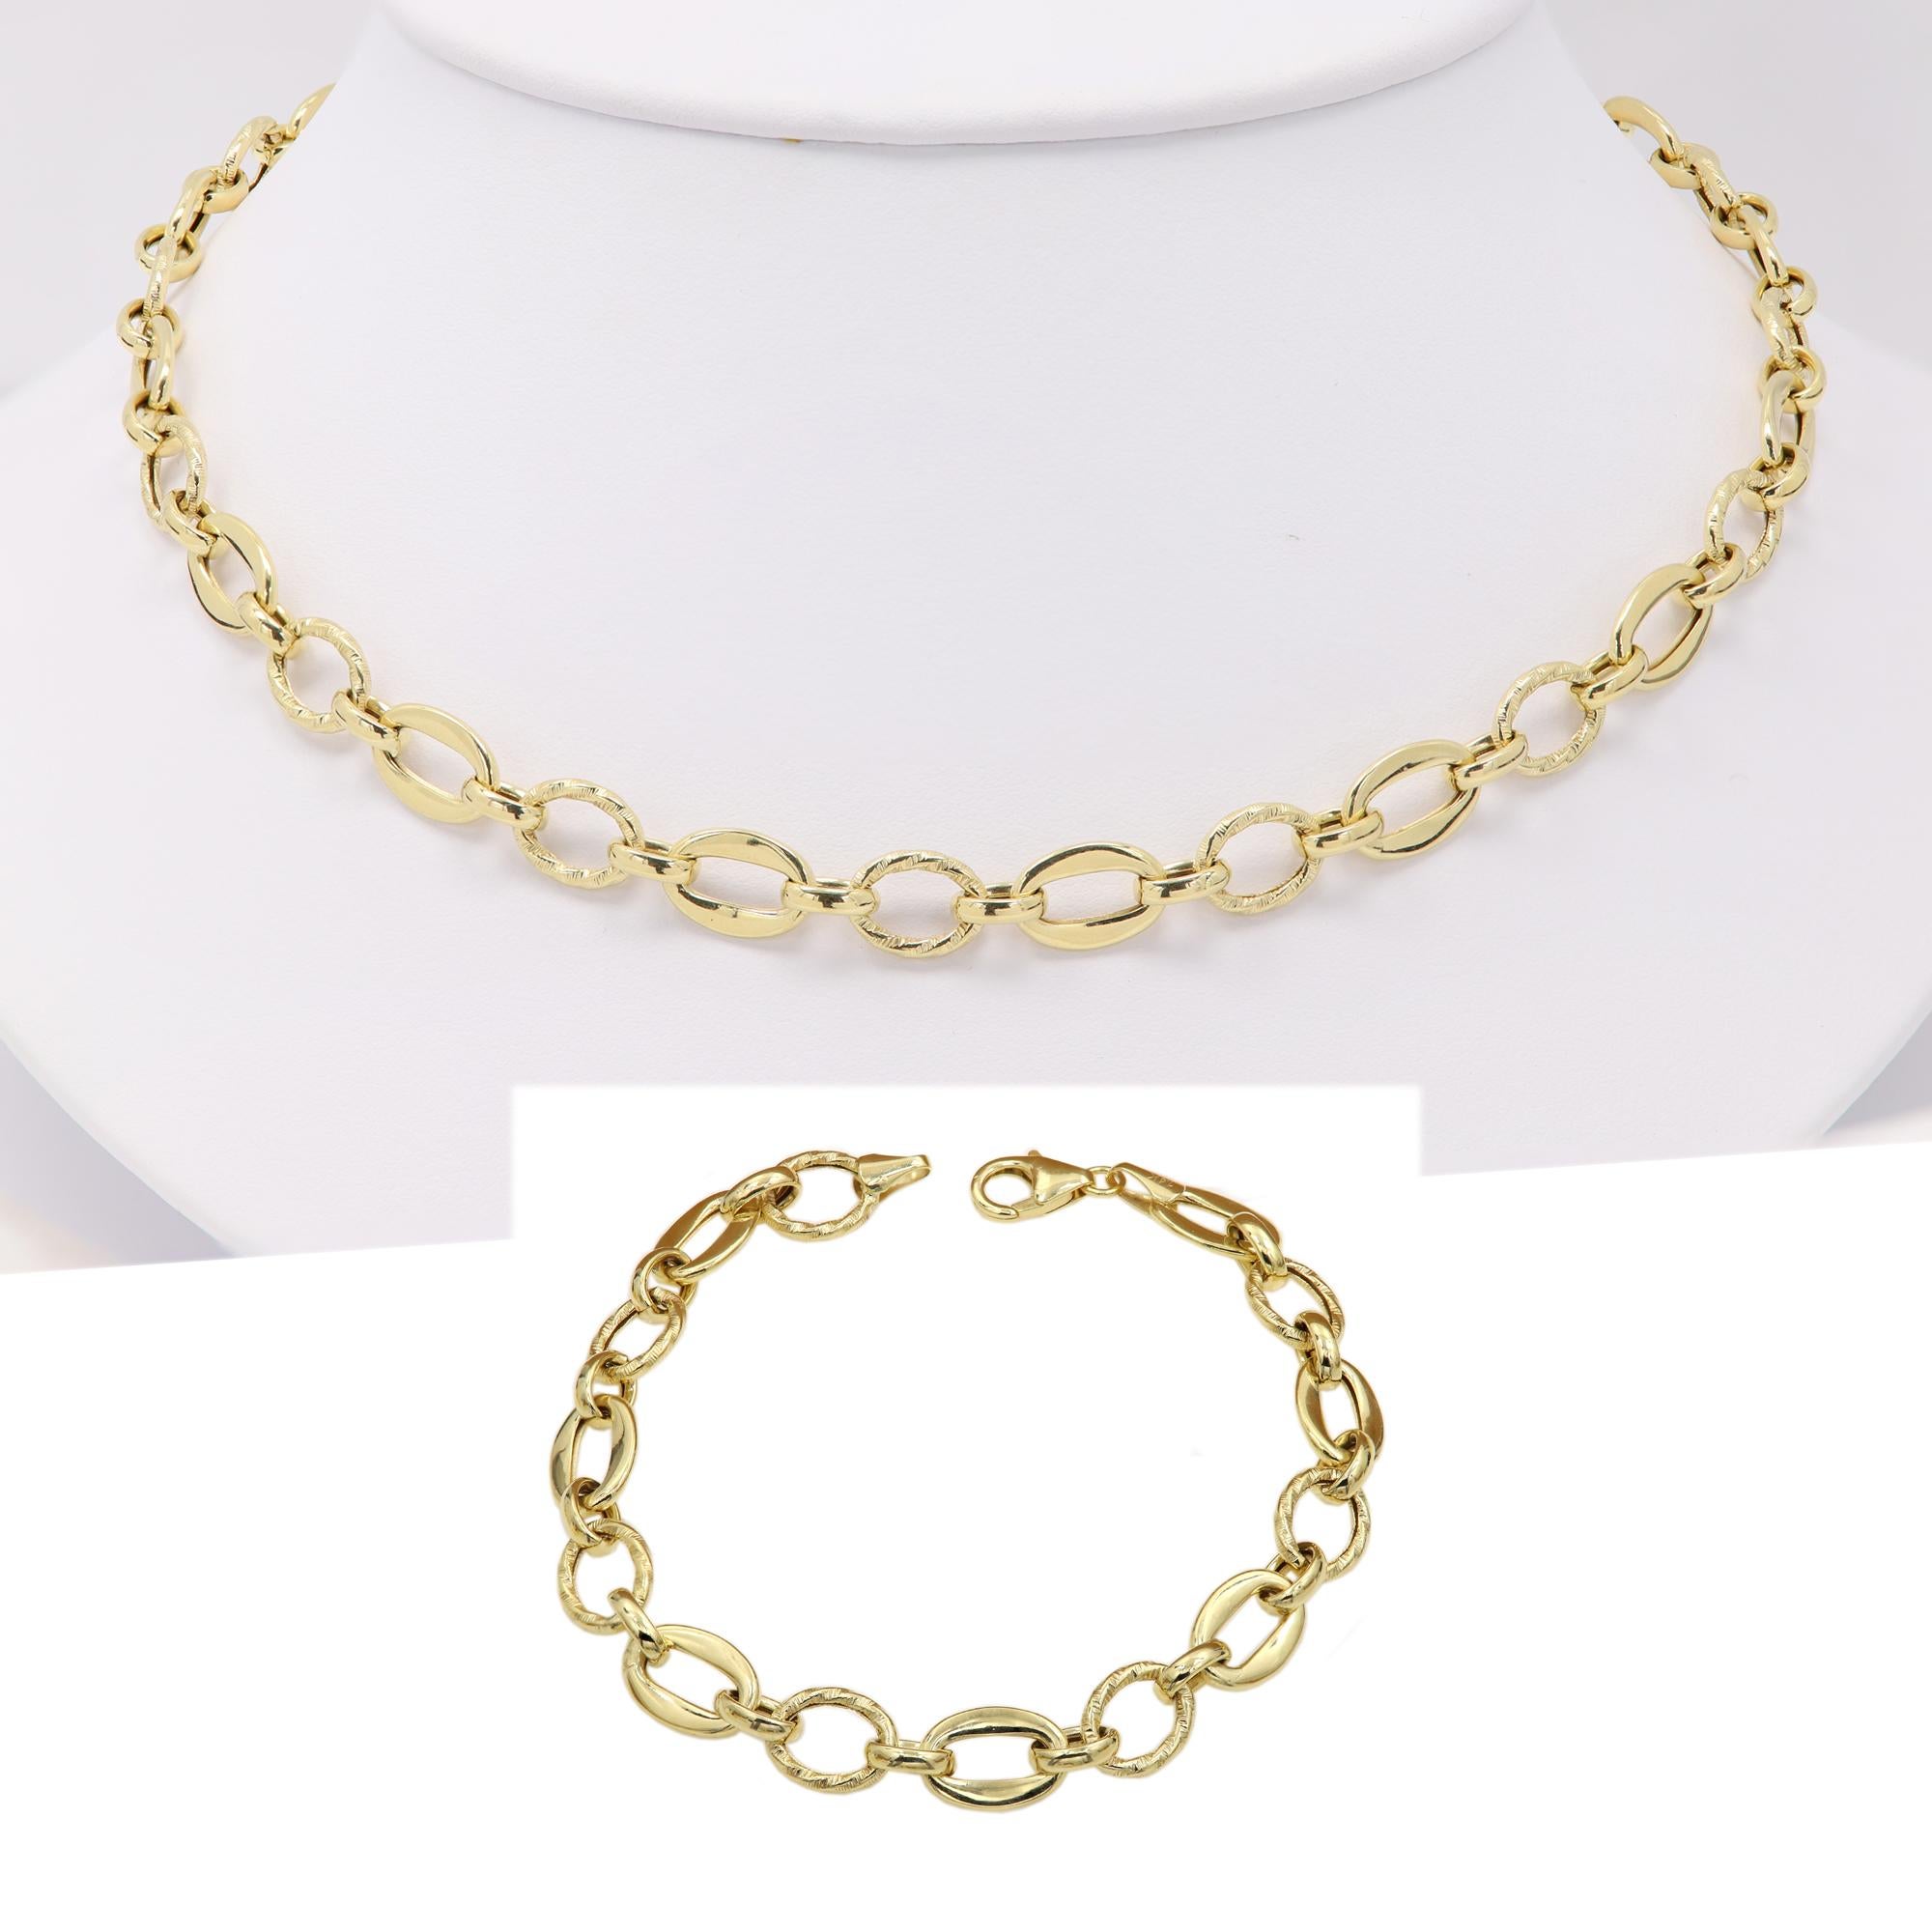 Italian Creative Link Chain set Necklace and Bracelet 14 Karat Yellow Gold Links For Sale 8